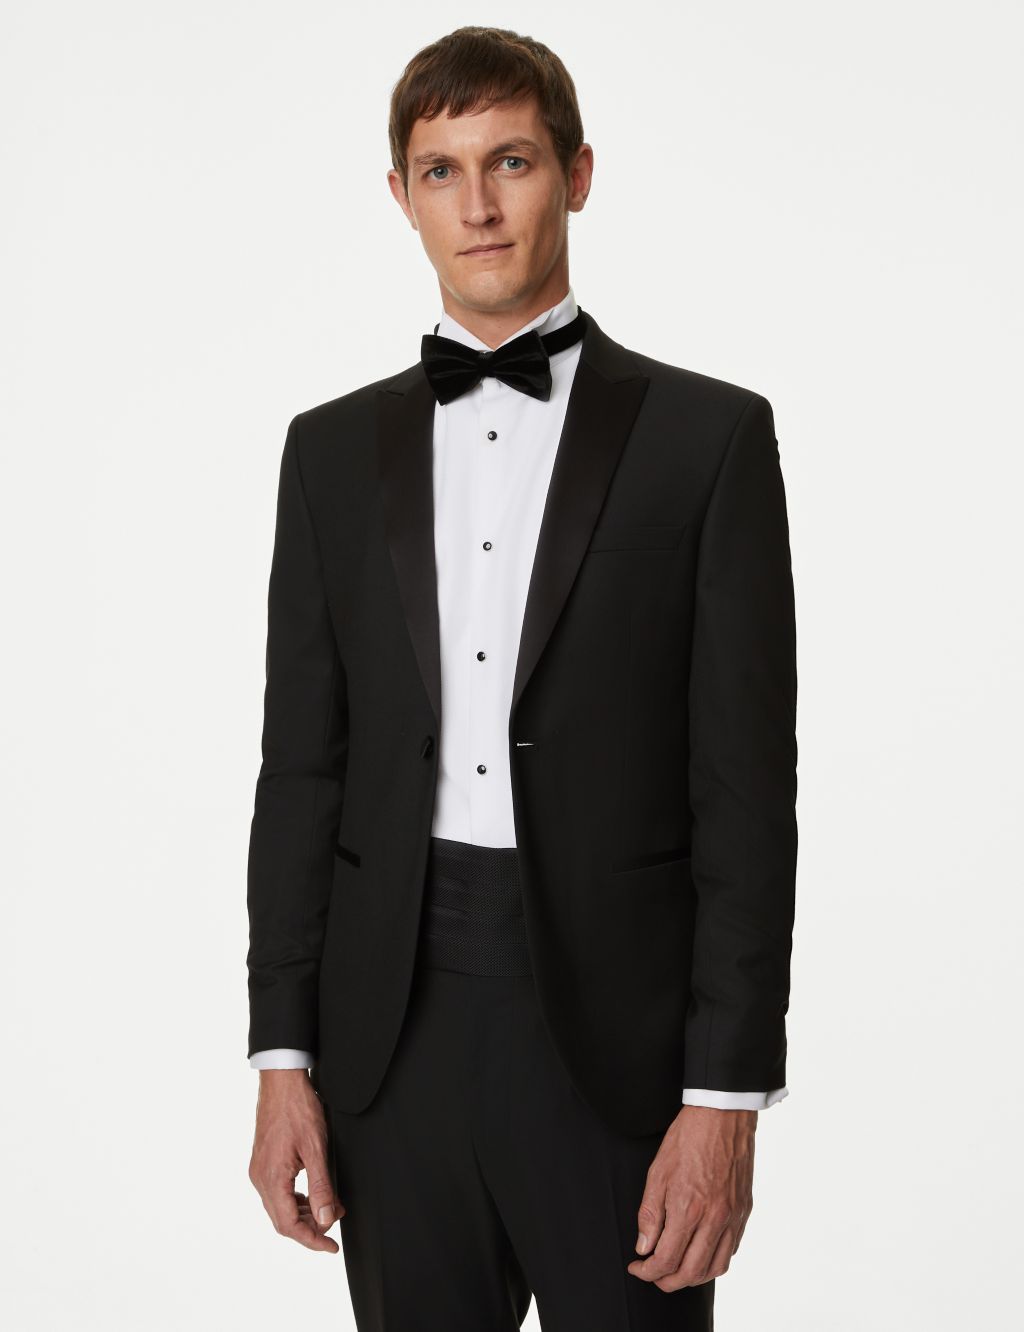 Skinny Fit Stretch Tuxedo Suit image 2